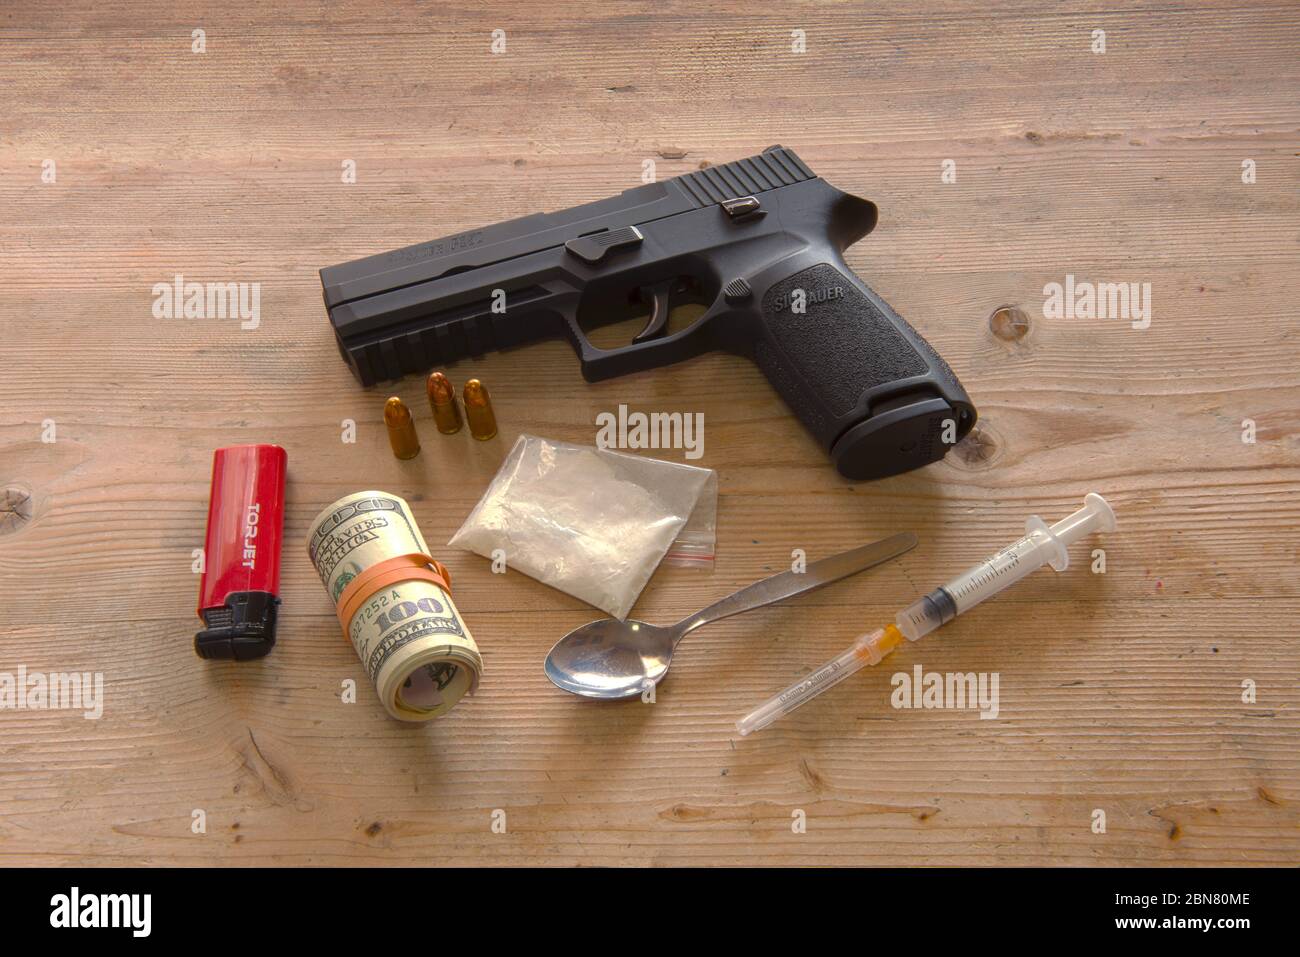 Drugs paraphernalia with a Sig Sauer P250 automatic pistol Stock Photo